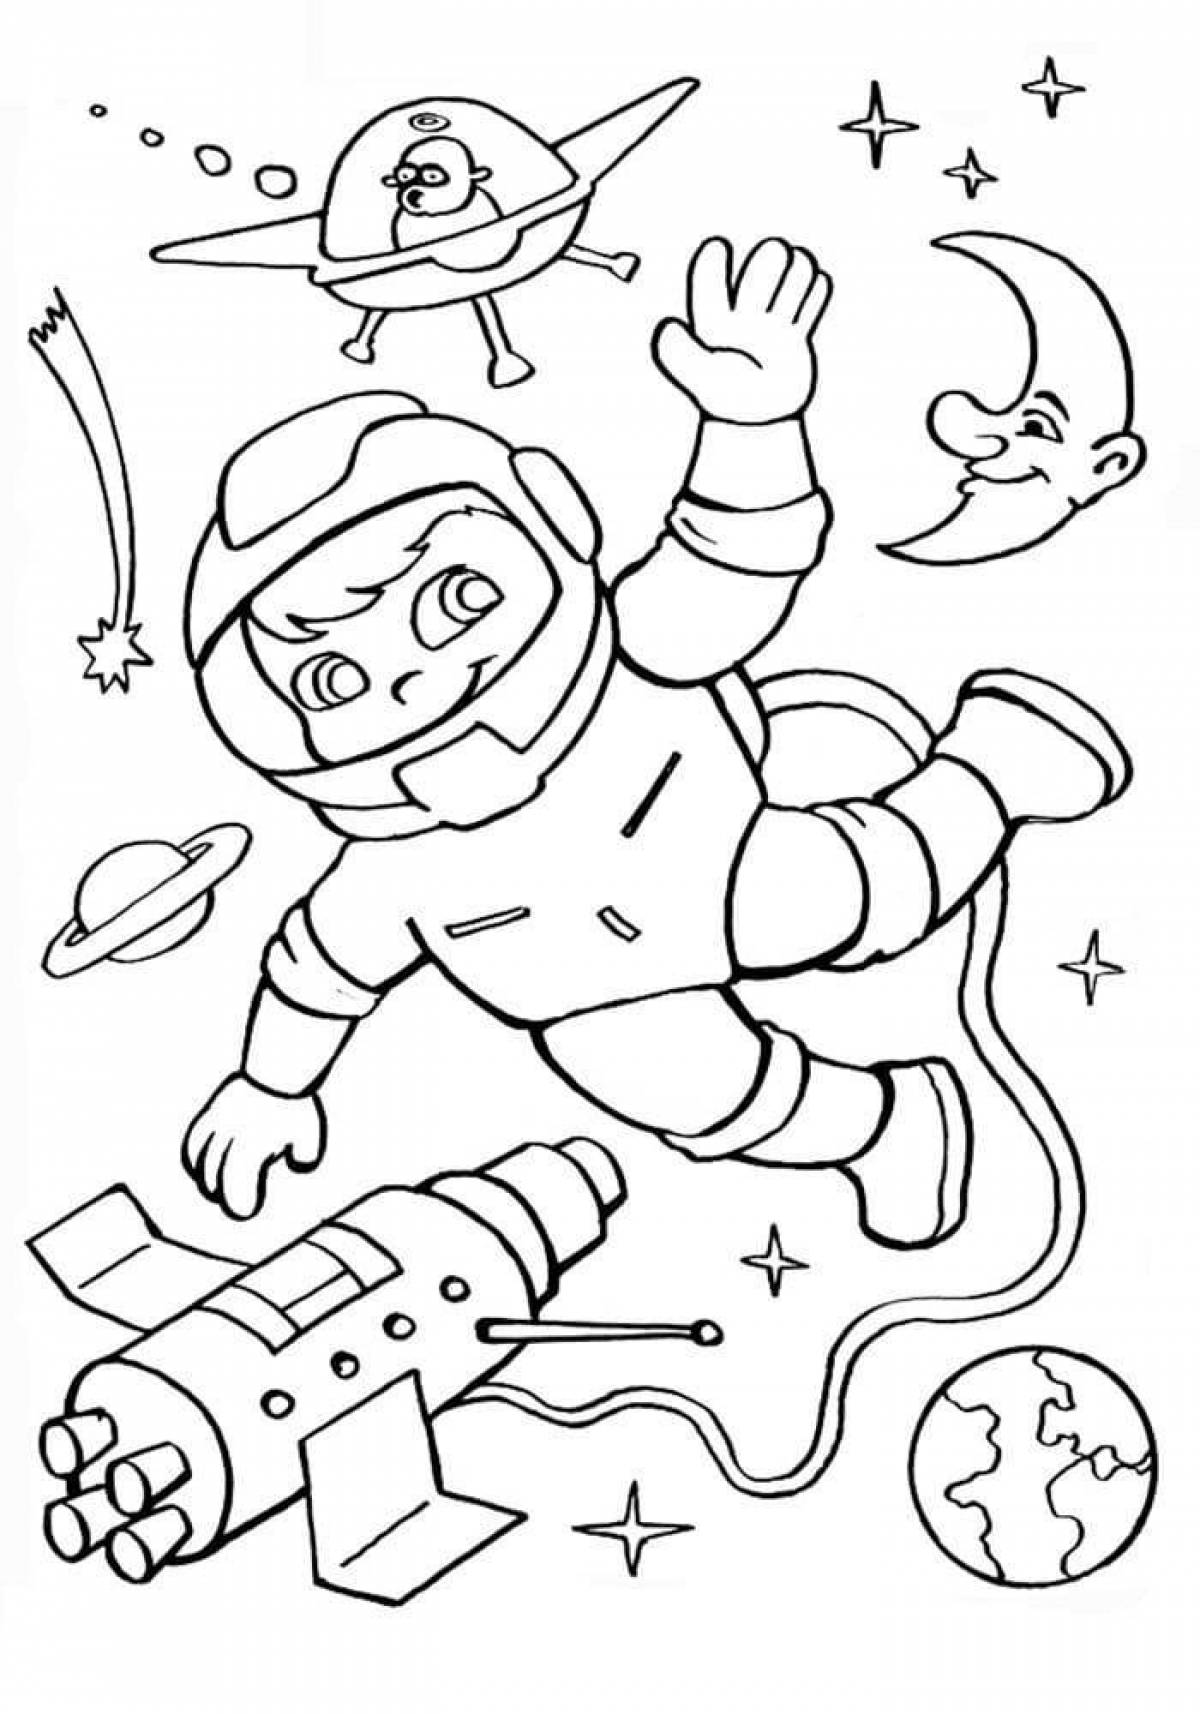 Majestic space coloring book for children 6-7 years old